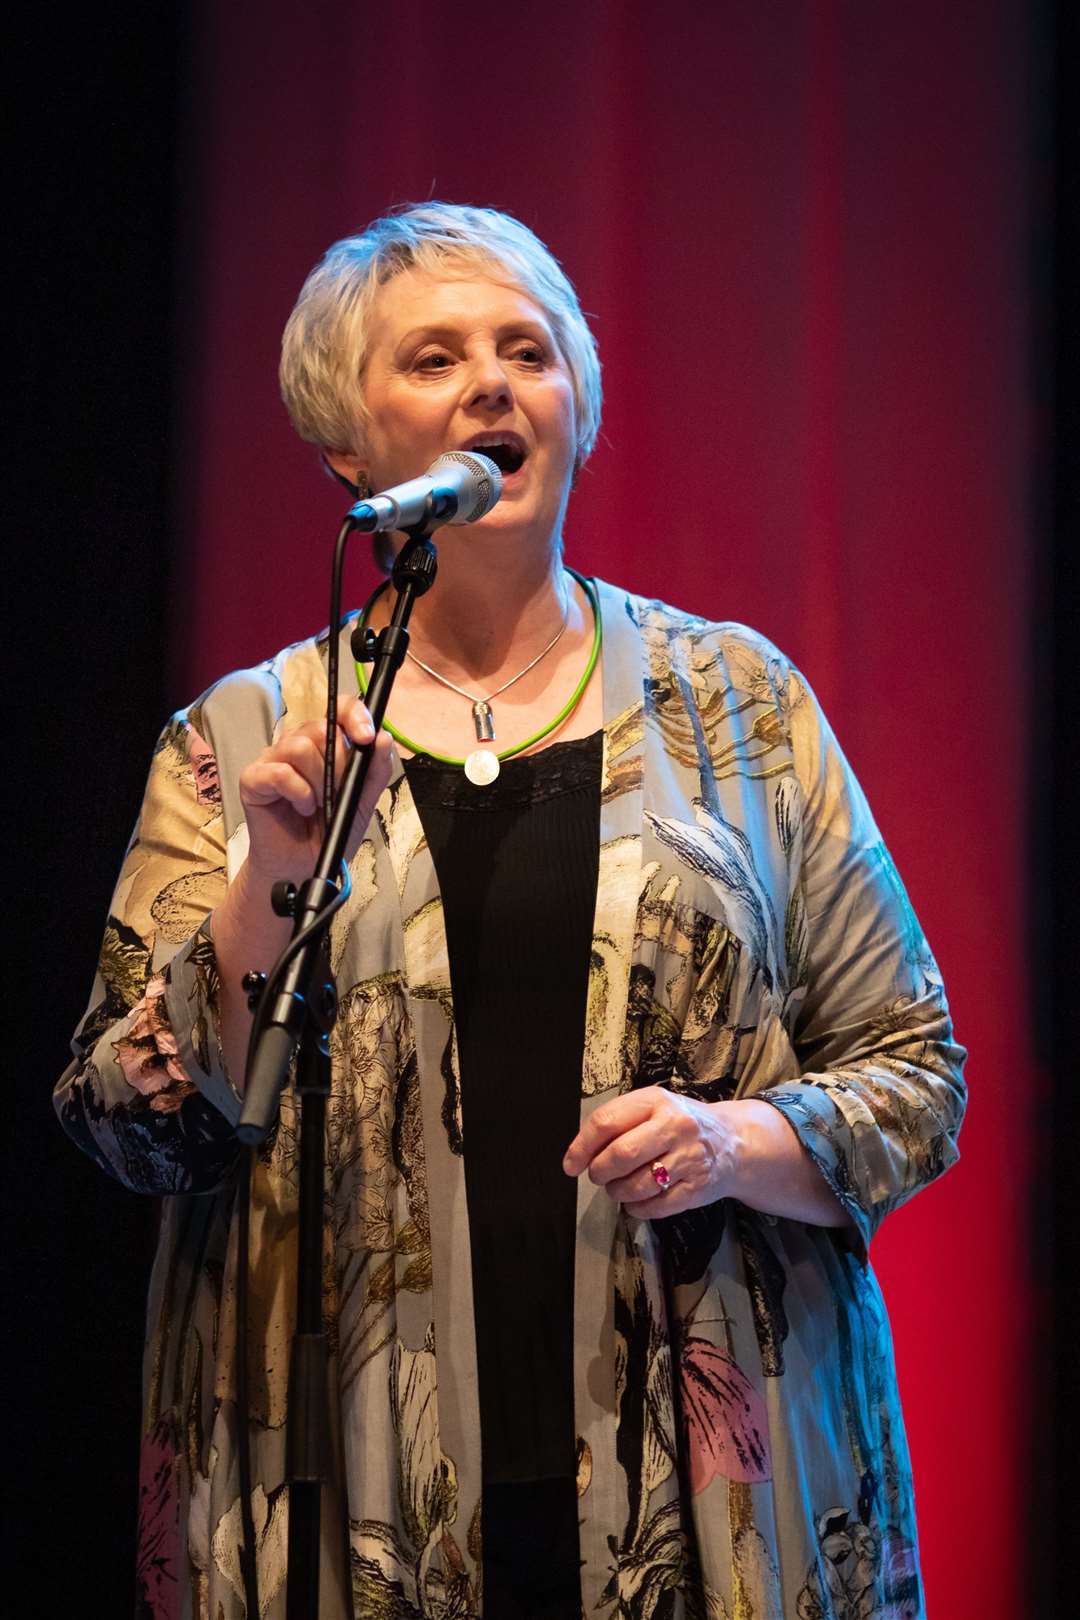 Special guest Gaelic singer, Margaret Stewart sings with Glenfinnan Ceilidh Band on stage at Eden Court Theatre on the openng night of live music, The Royal National Mòd 2021